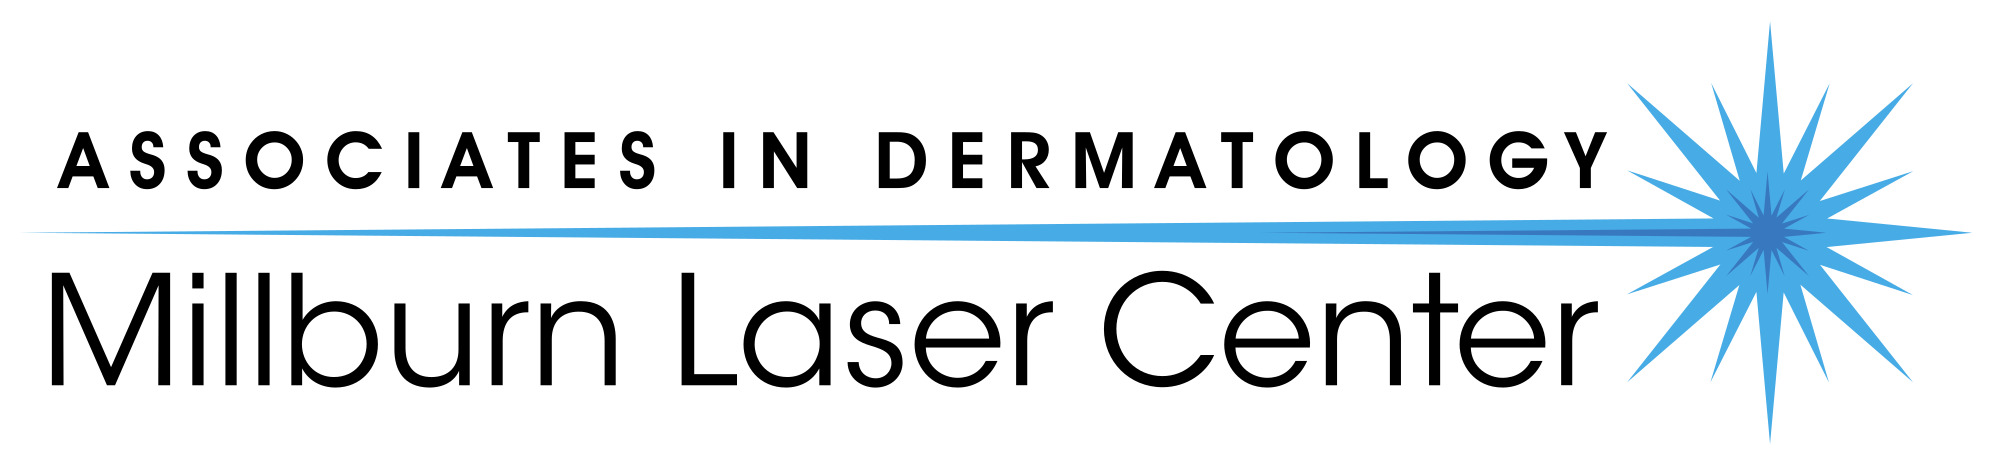 Cosmetic Dermatology Center Publishes New Blog Post